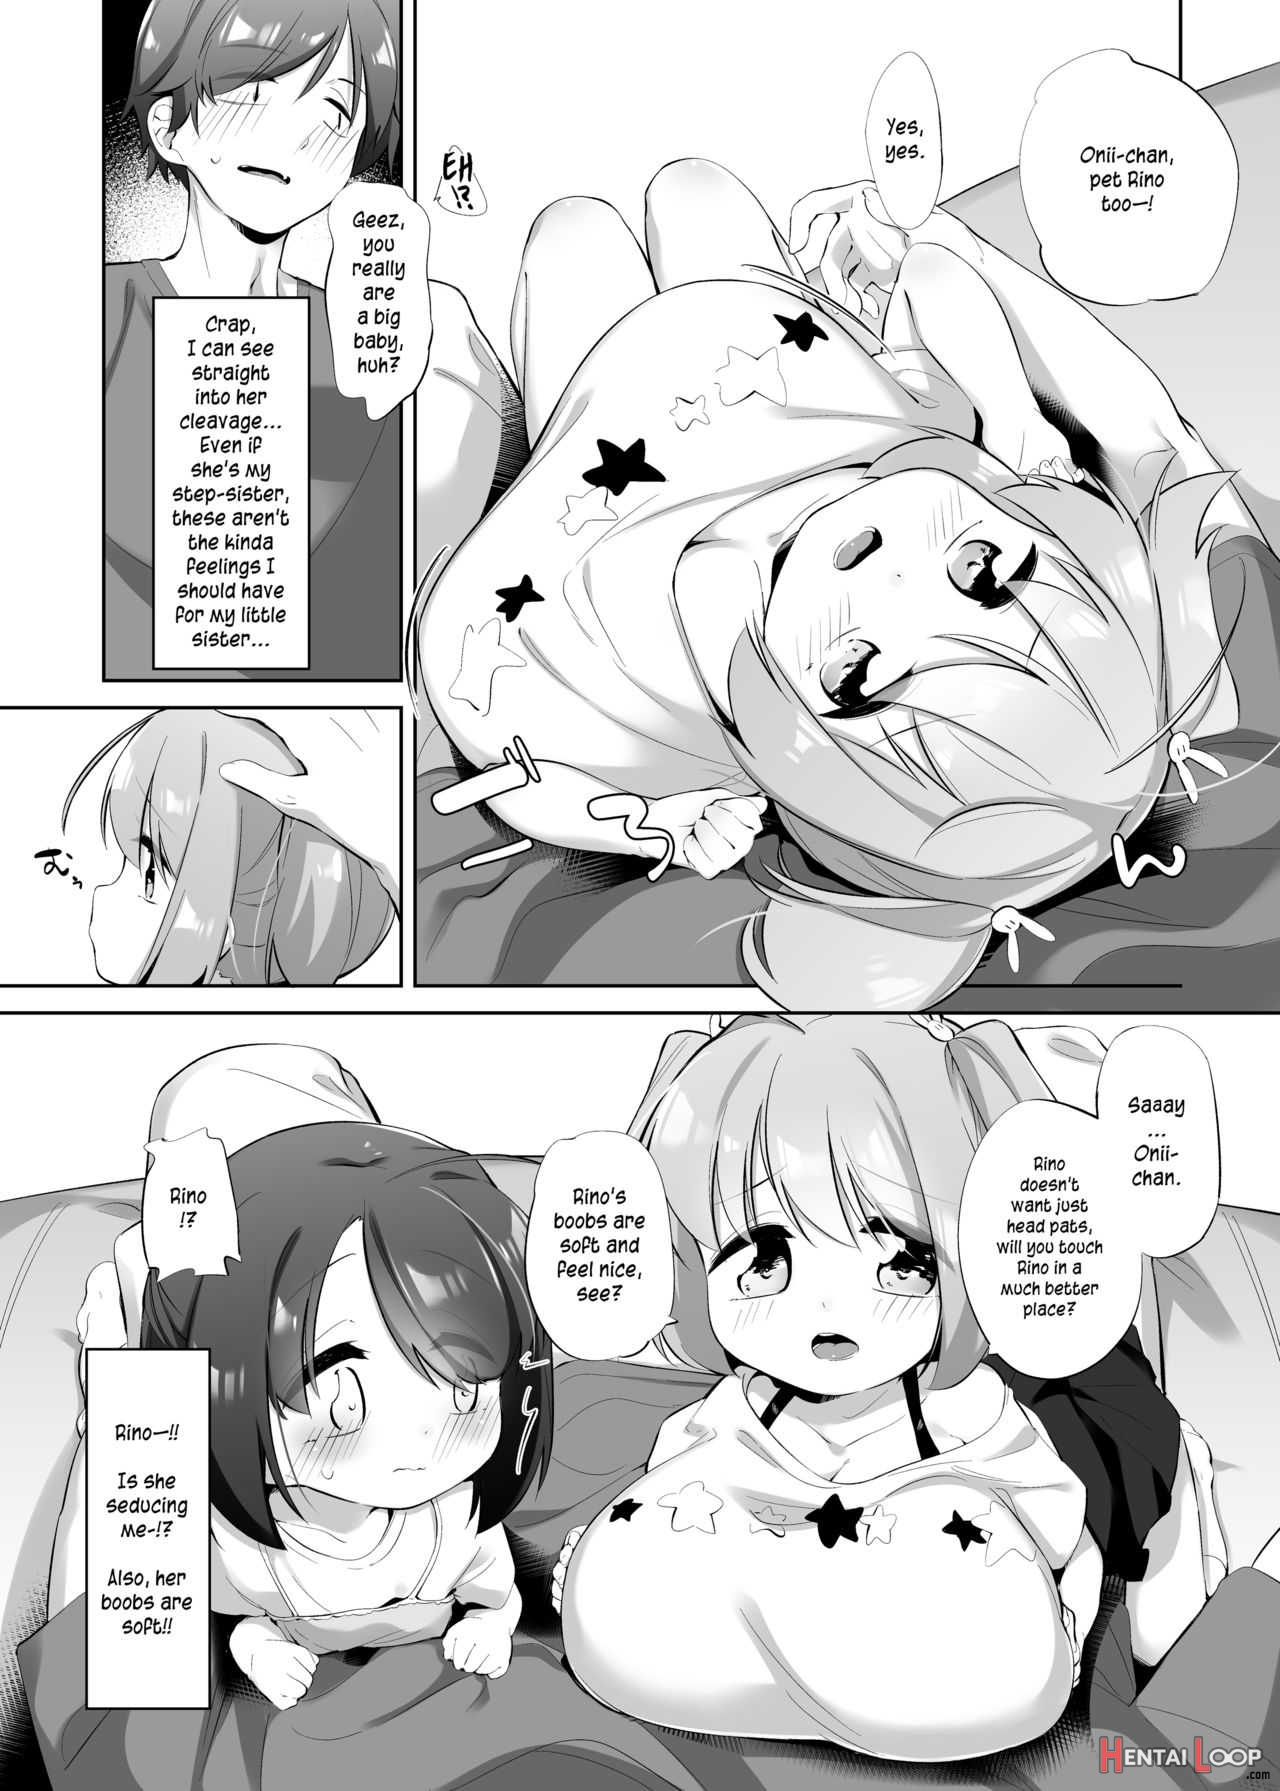 Between Sisters, Are You Happy? page 7